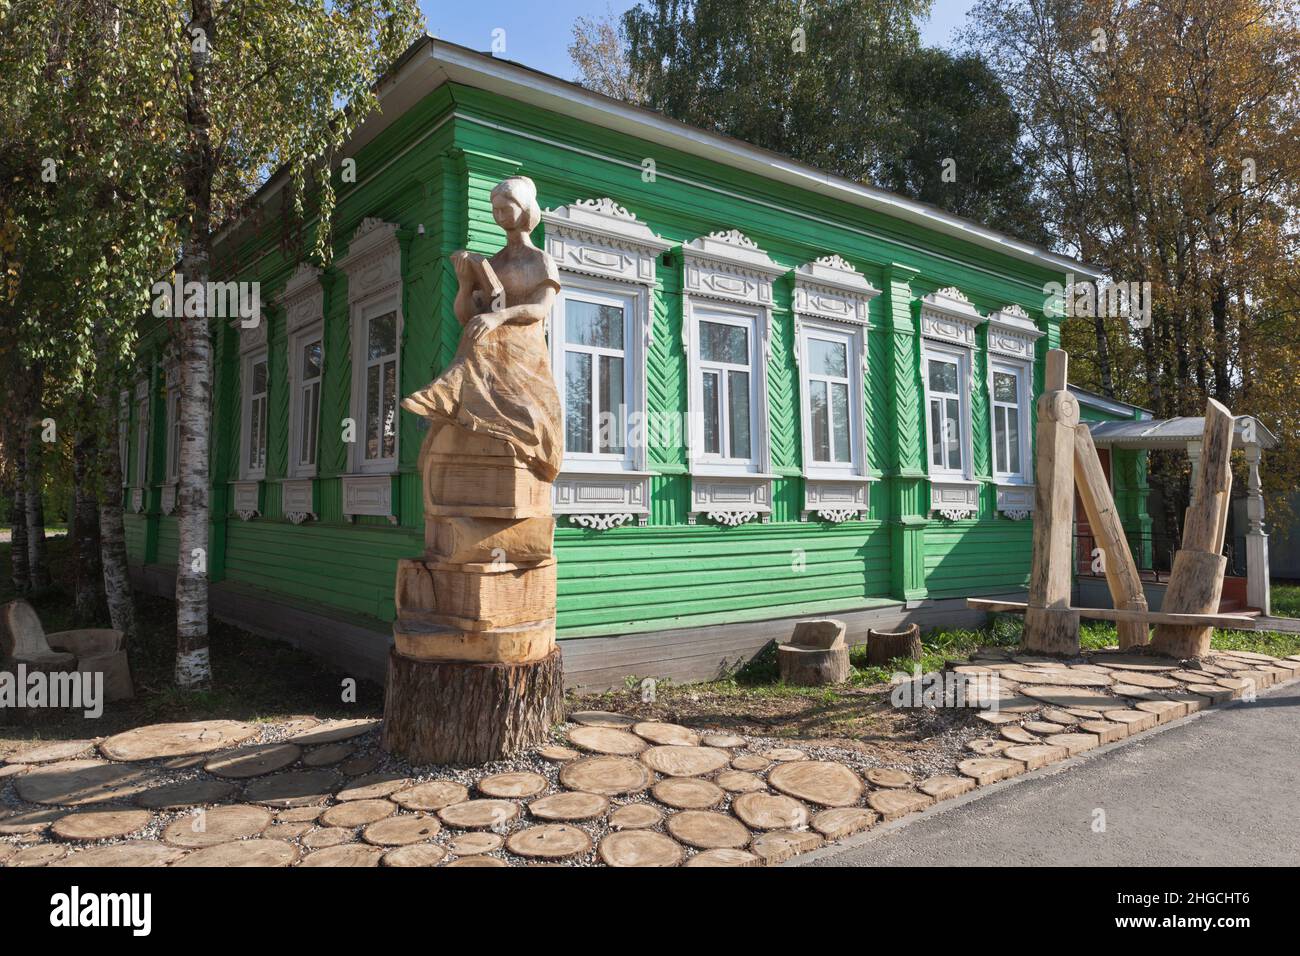 Totma, Vologda region, Russia - September 24, 2020: Wooden sculpture Reader near the building of the education department of the Totma municipal distr Stock Photo